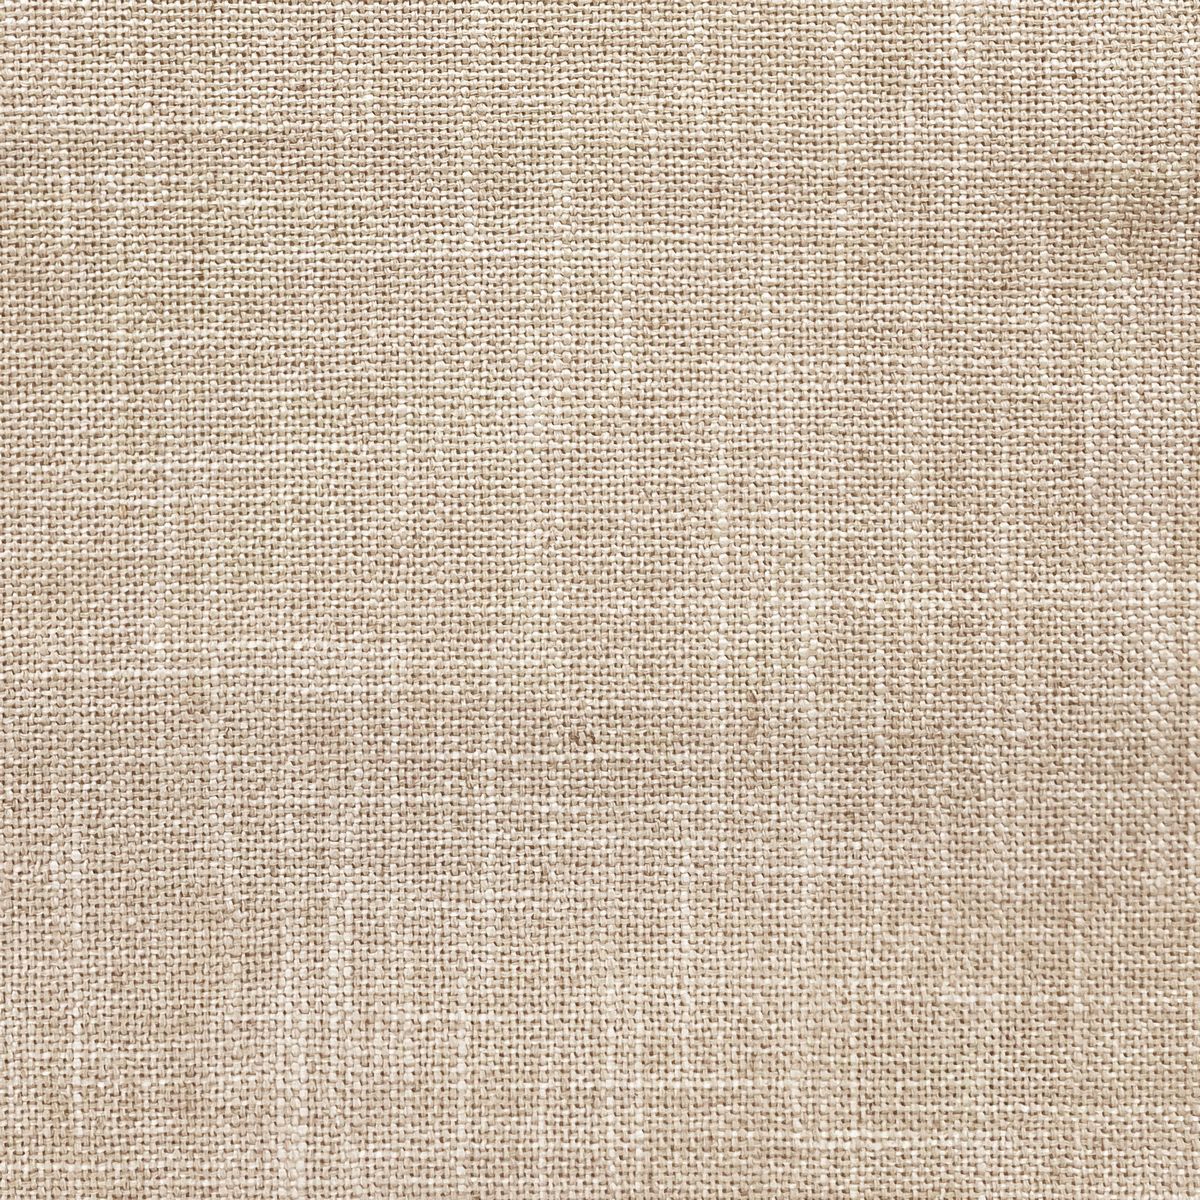 Cotswold Oyster Fabric by Chatham Glyn